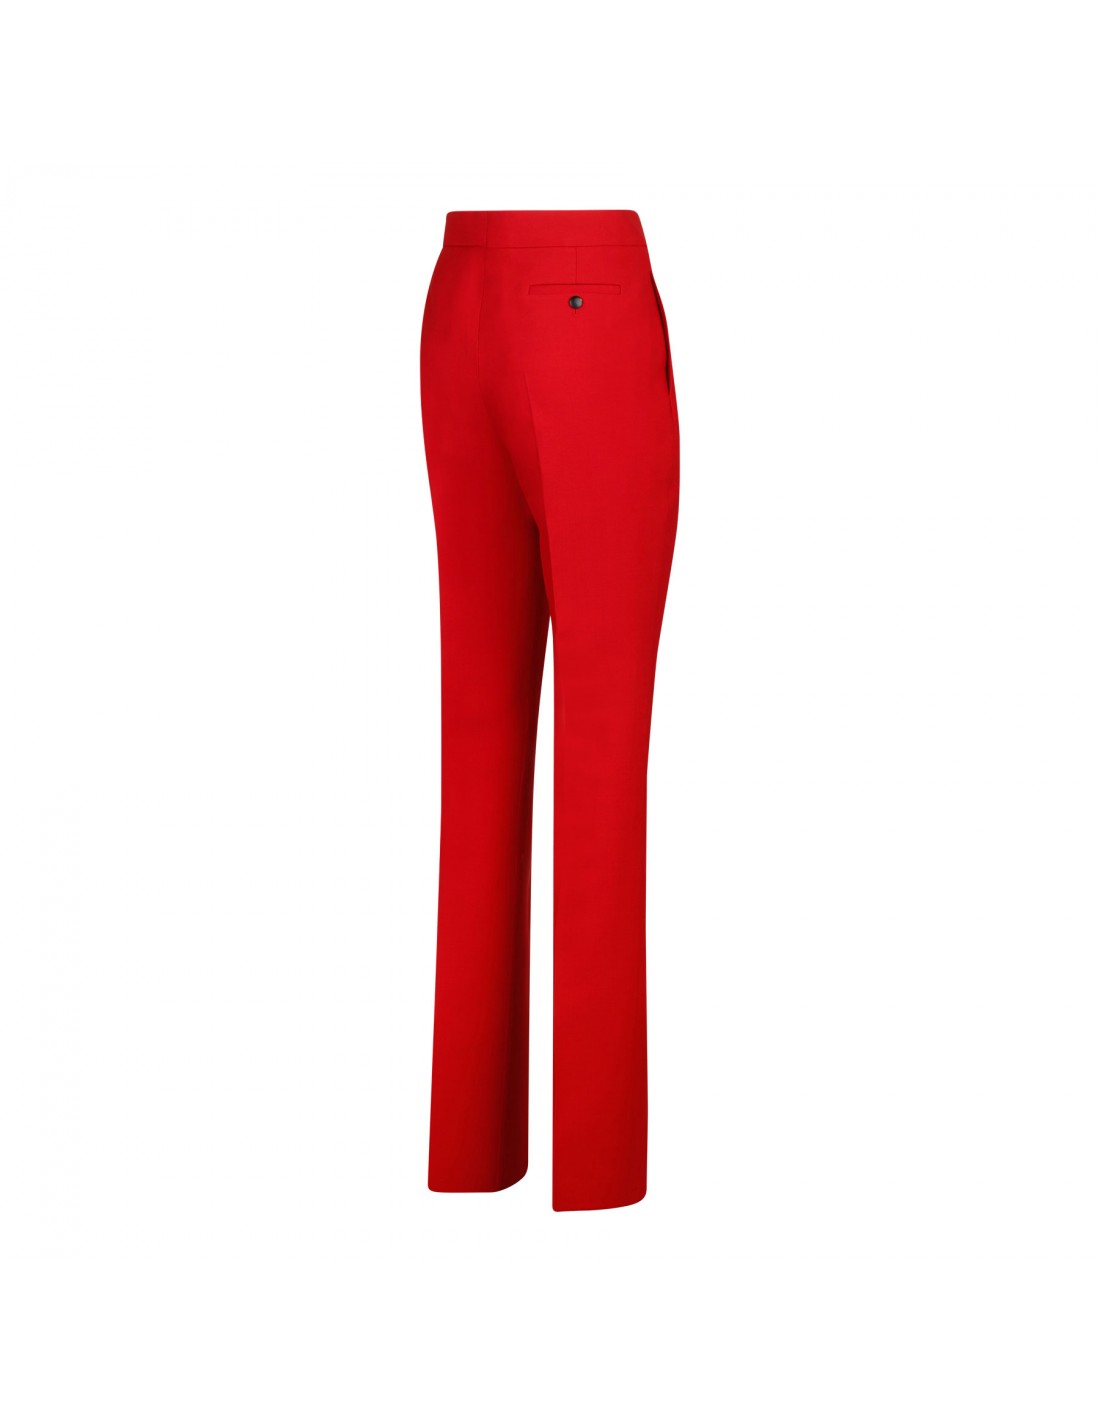 Red tailored pants